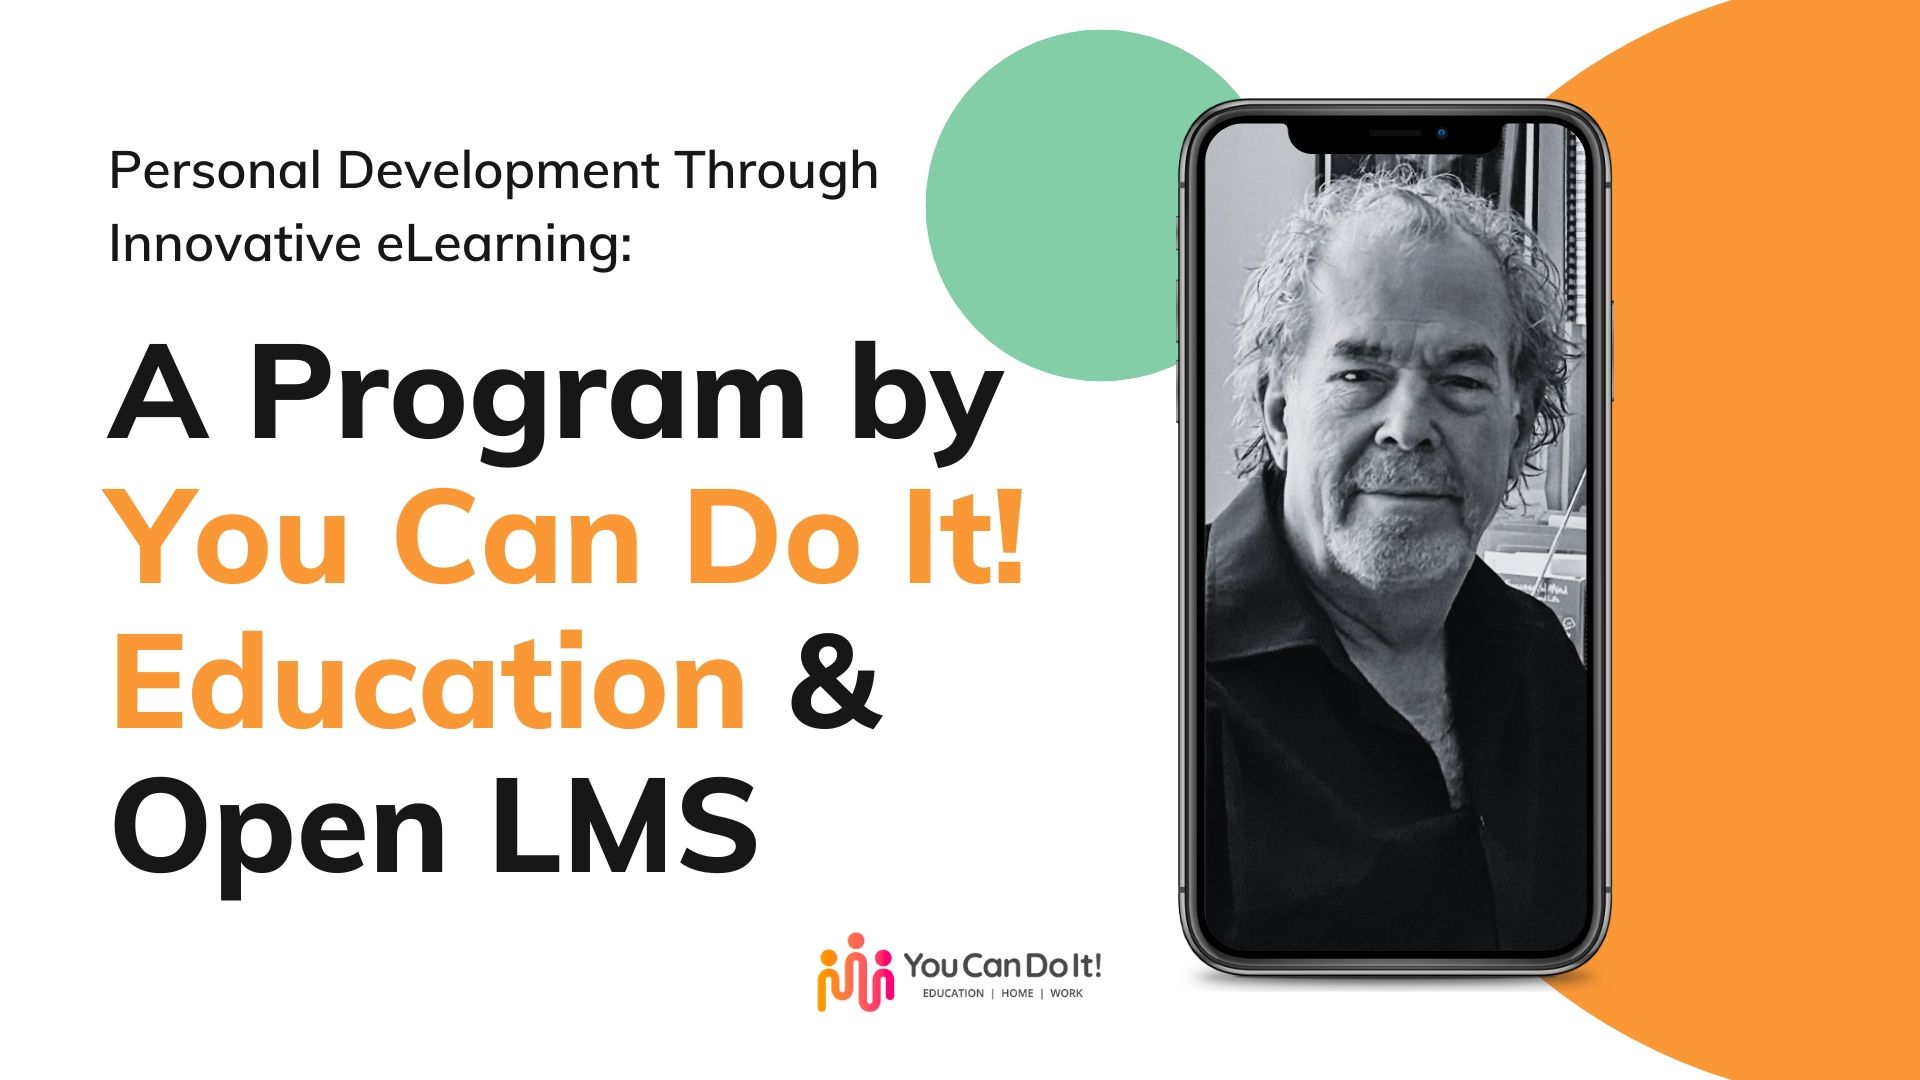 Personal Development Through Innovative eLearning: A Program by You Can Do It! Education and Open LMS